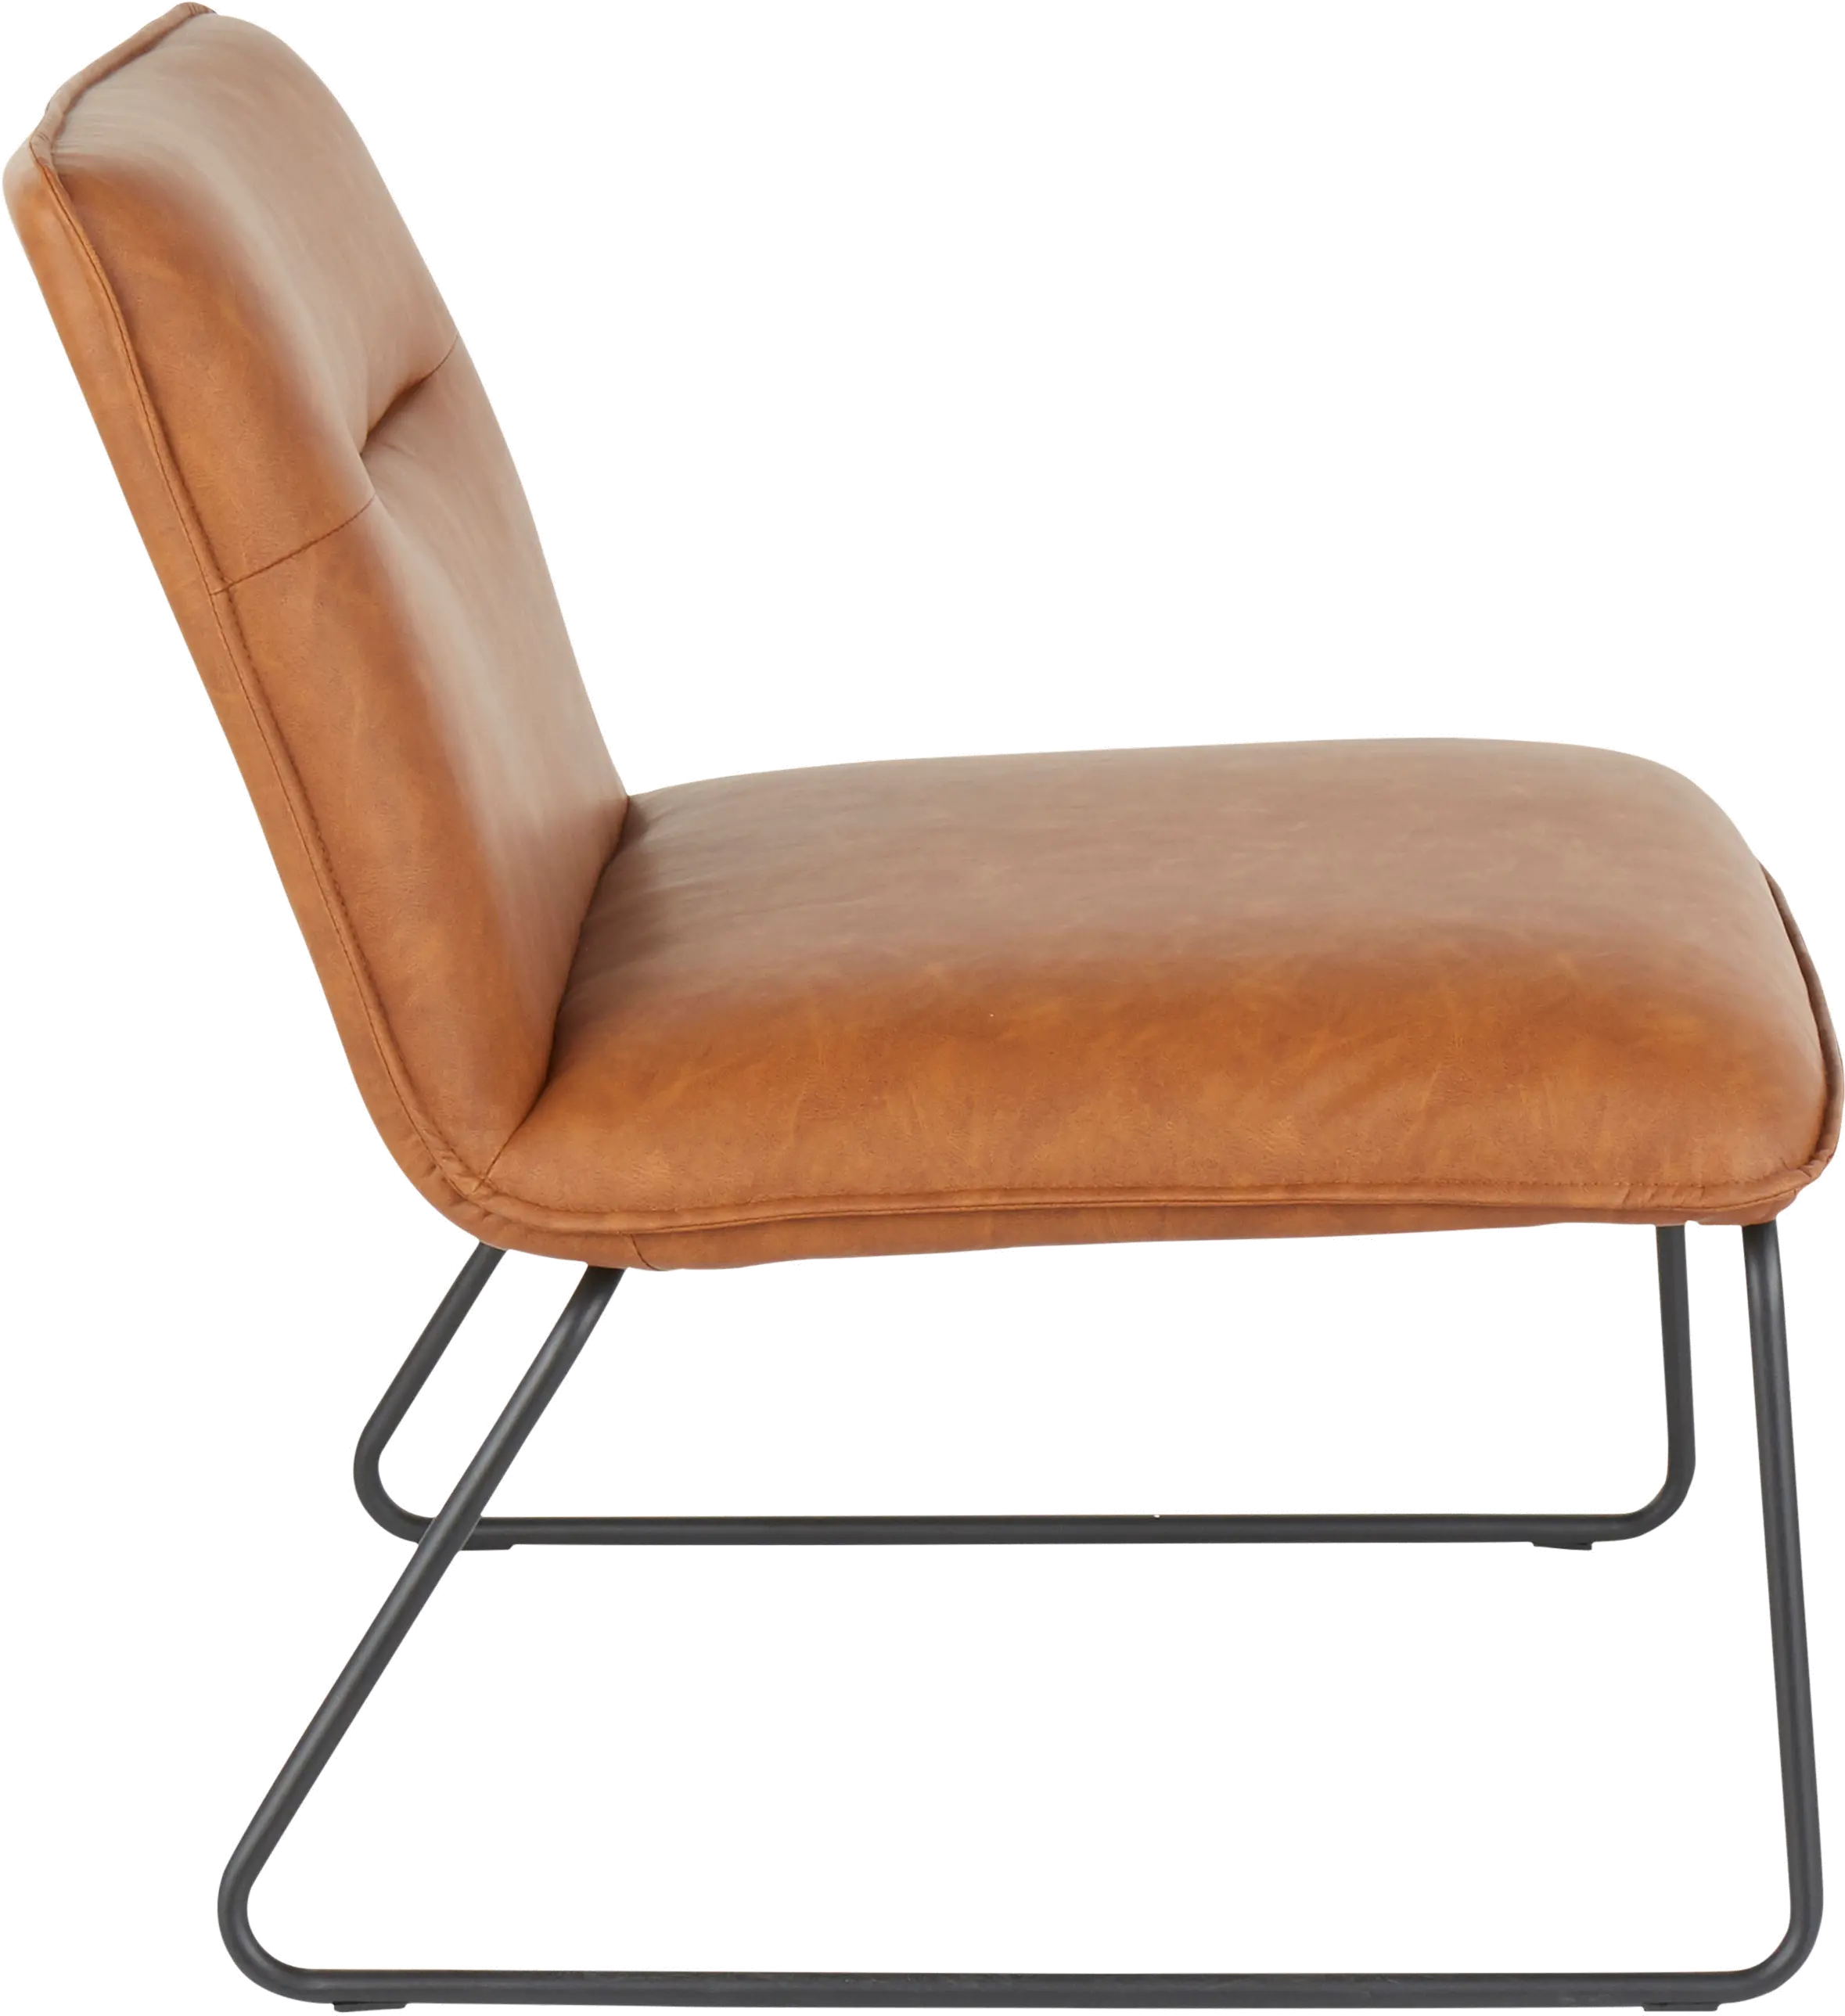 Casper Industrial Camel Faux Leather Accent Chair